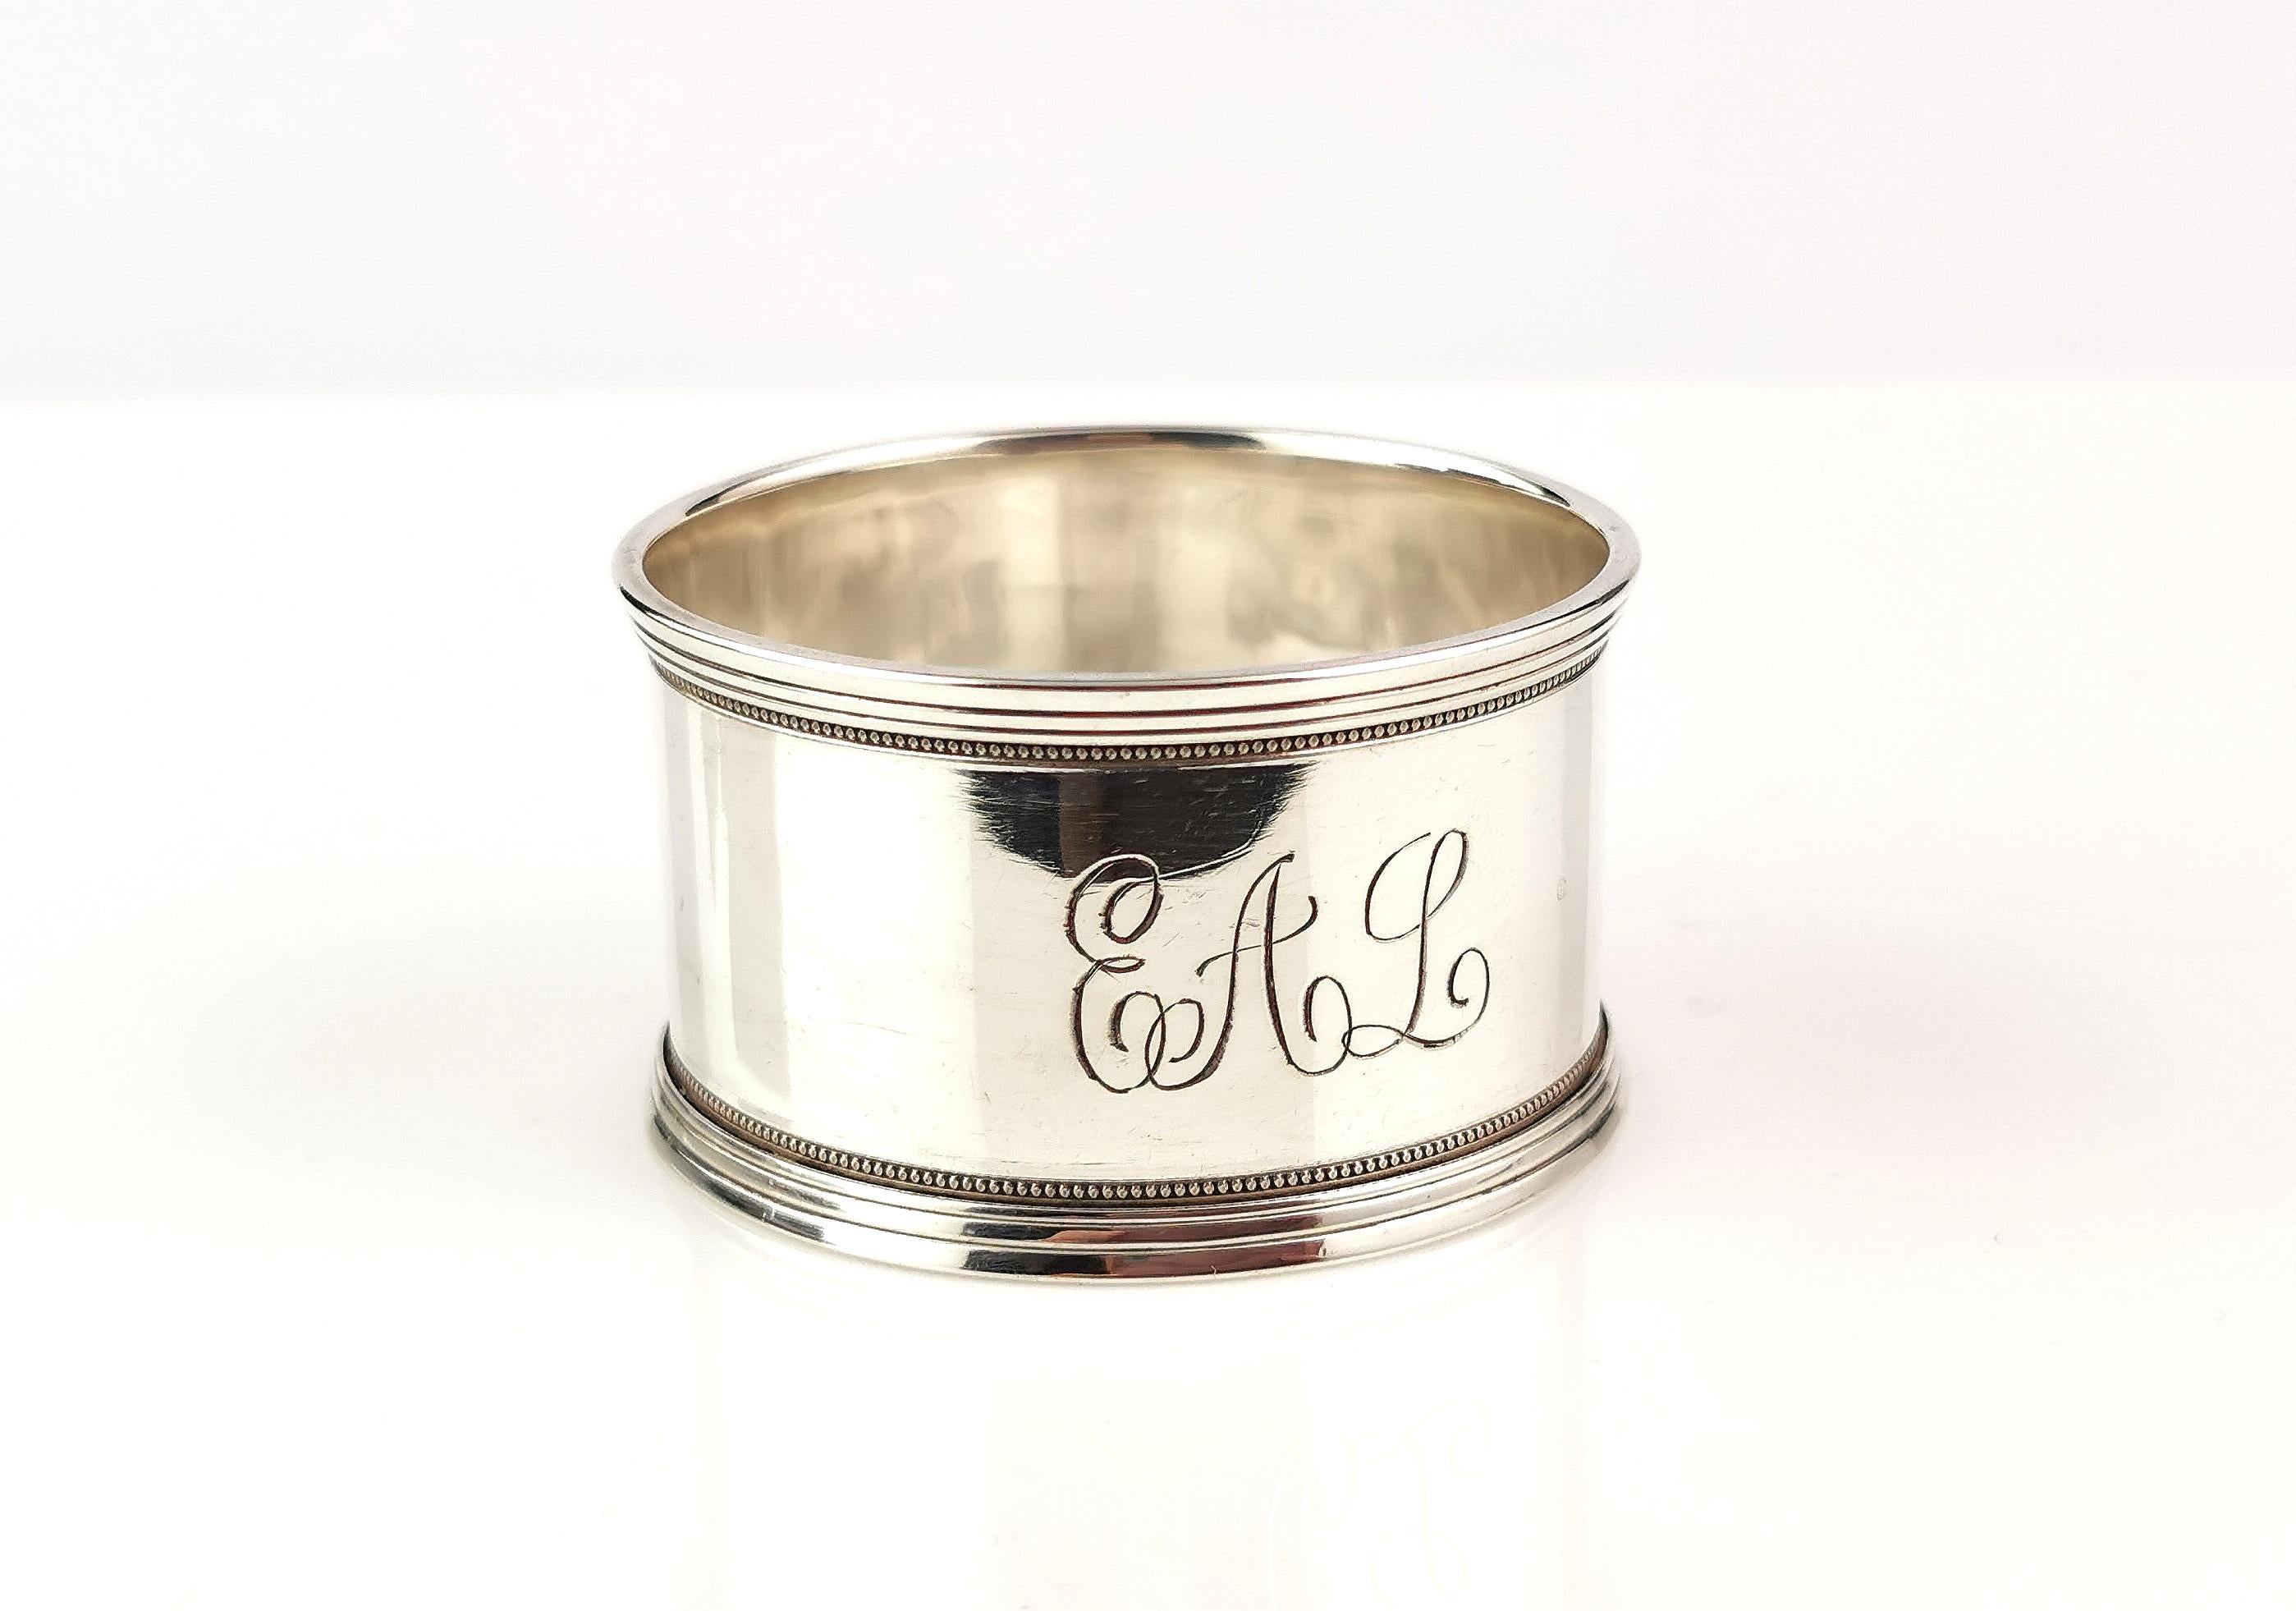 An attractive antique sterling silver napkin ring.

It is a sleek high polished napkin ring.

The body is a cylindrical shape with a slight rim that has a detailed millegrain edging top and bottom.

The monogram to the front has been hand engraved